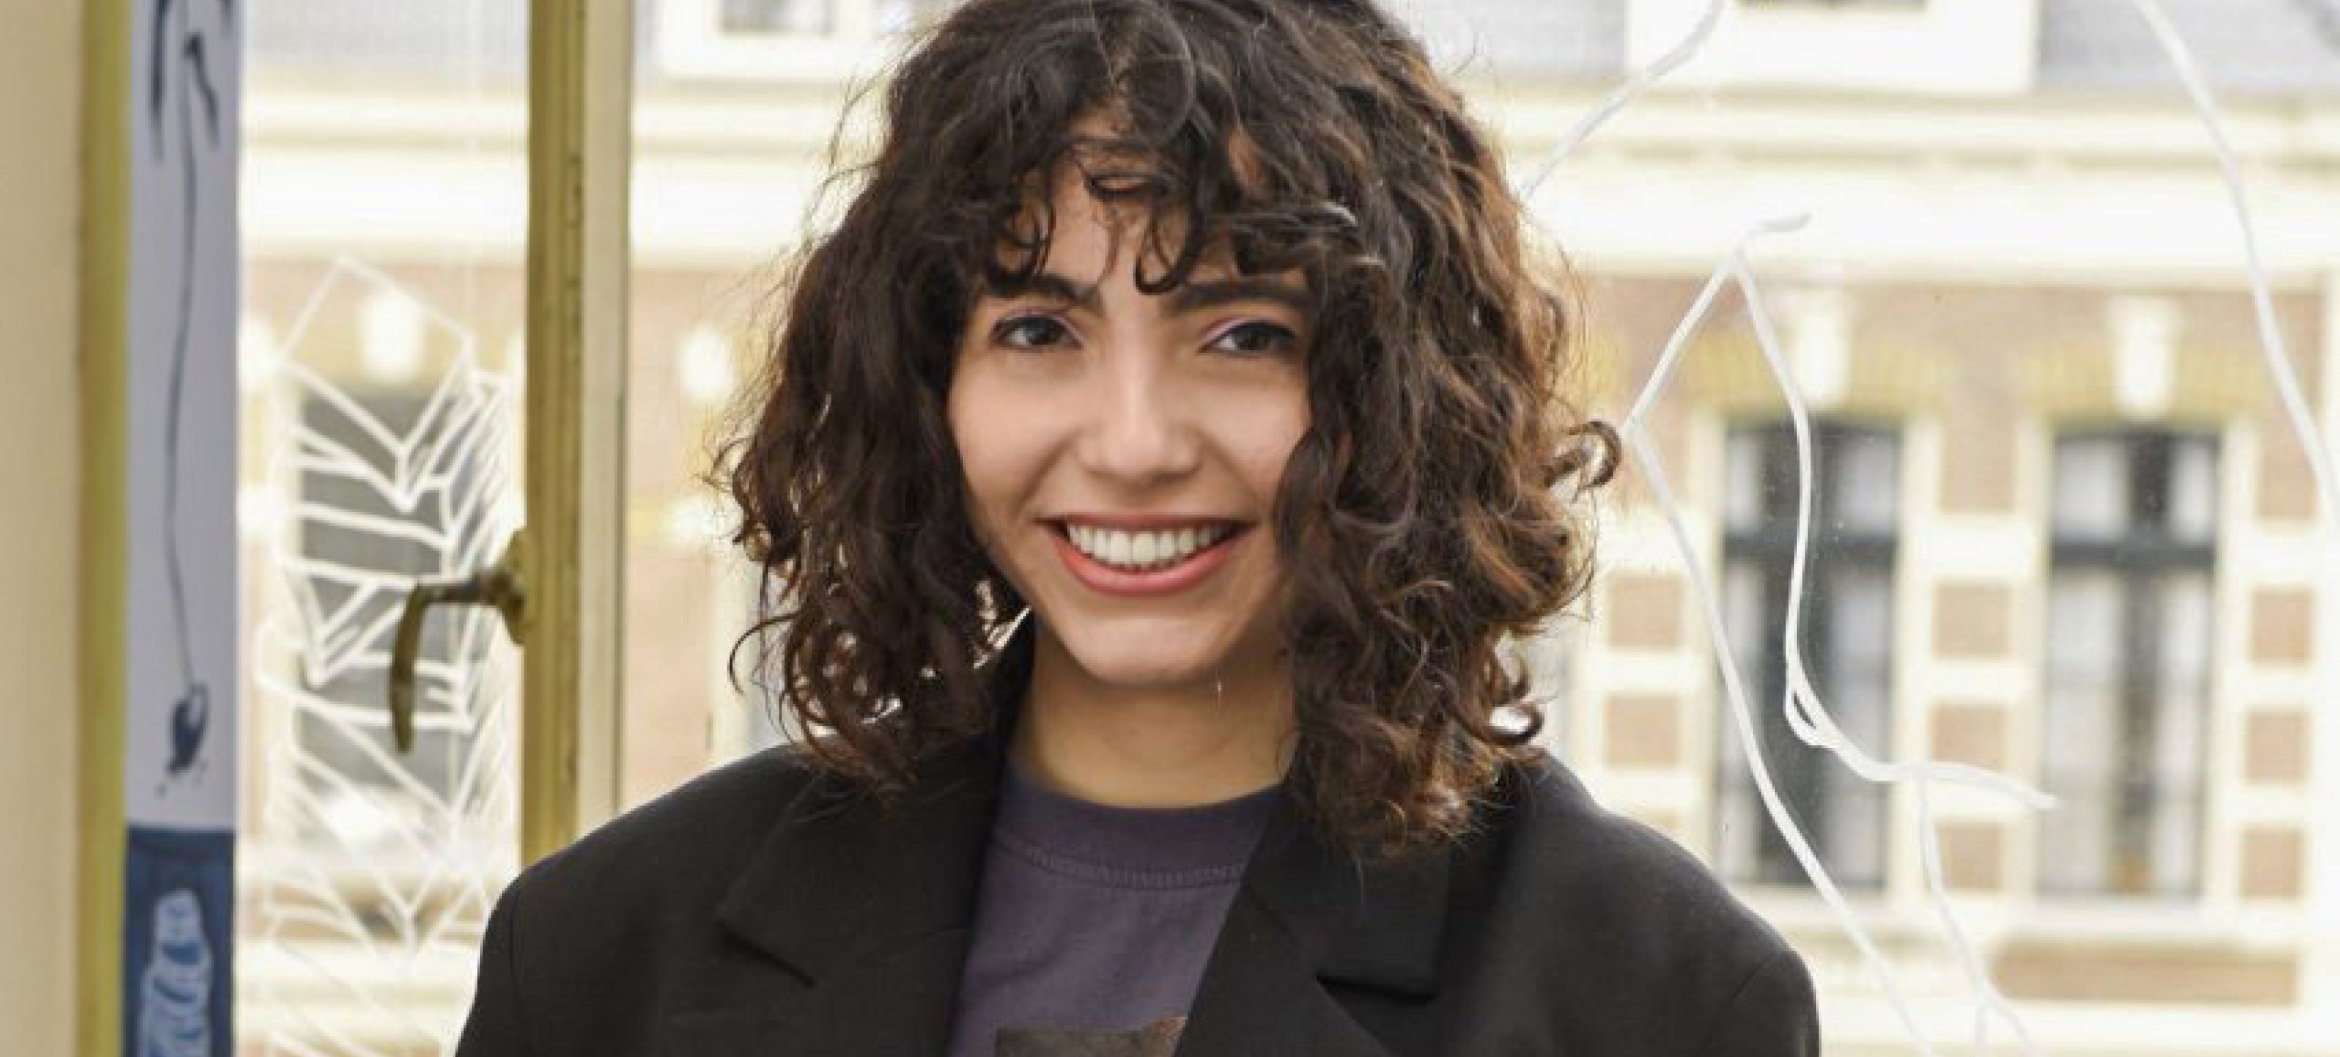 Irem Biter, master&#039;s student in Interior Architecture. Read the story about her remarkable finals research on the experiences of Turkish queer migrants in this week&#039;s #finalsfriday.